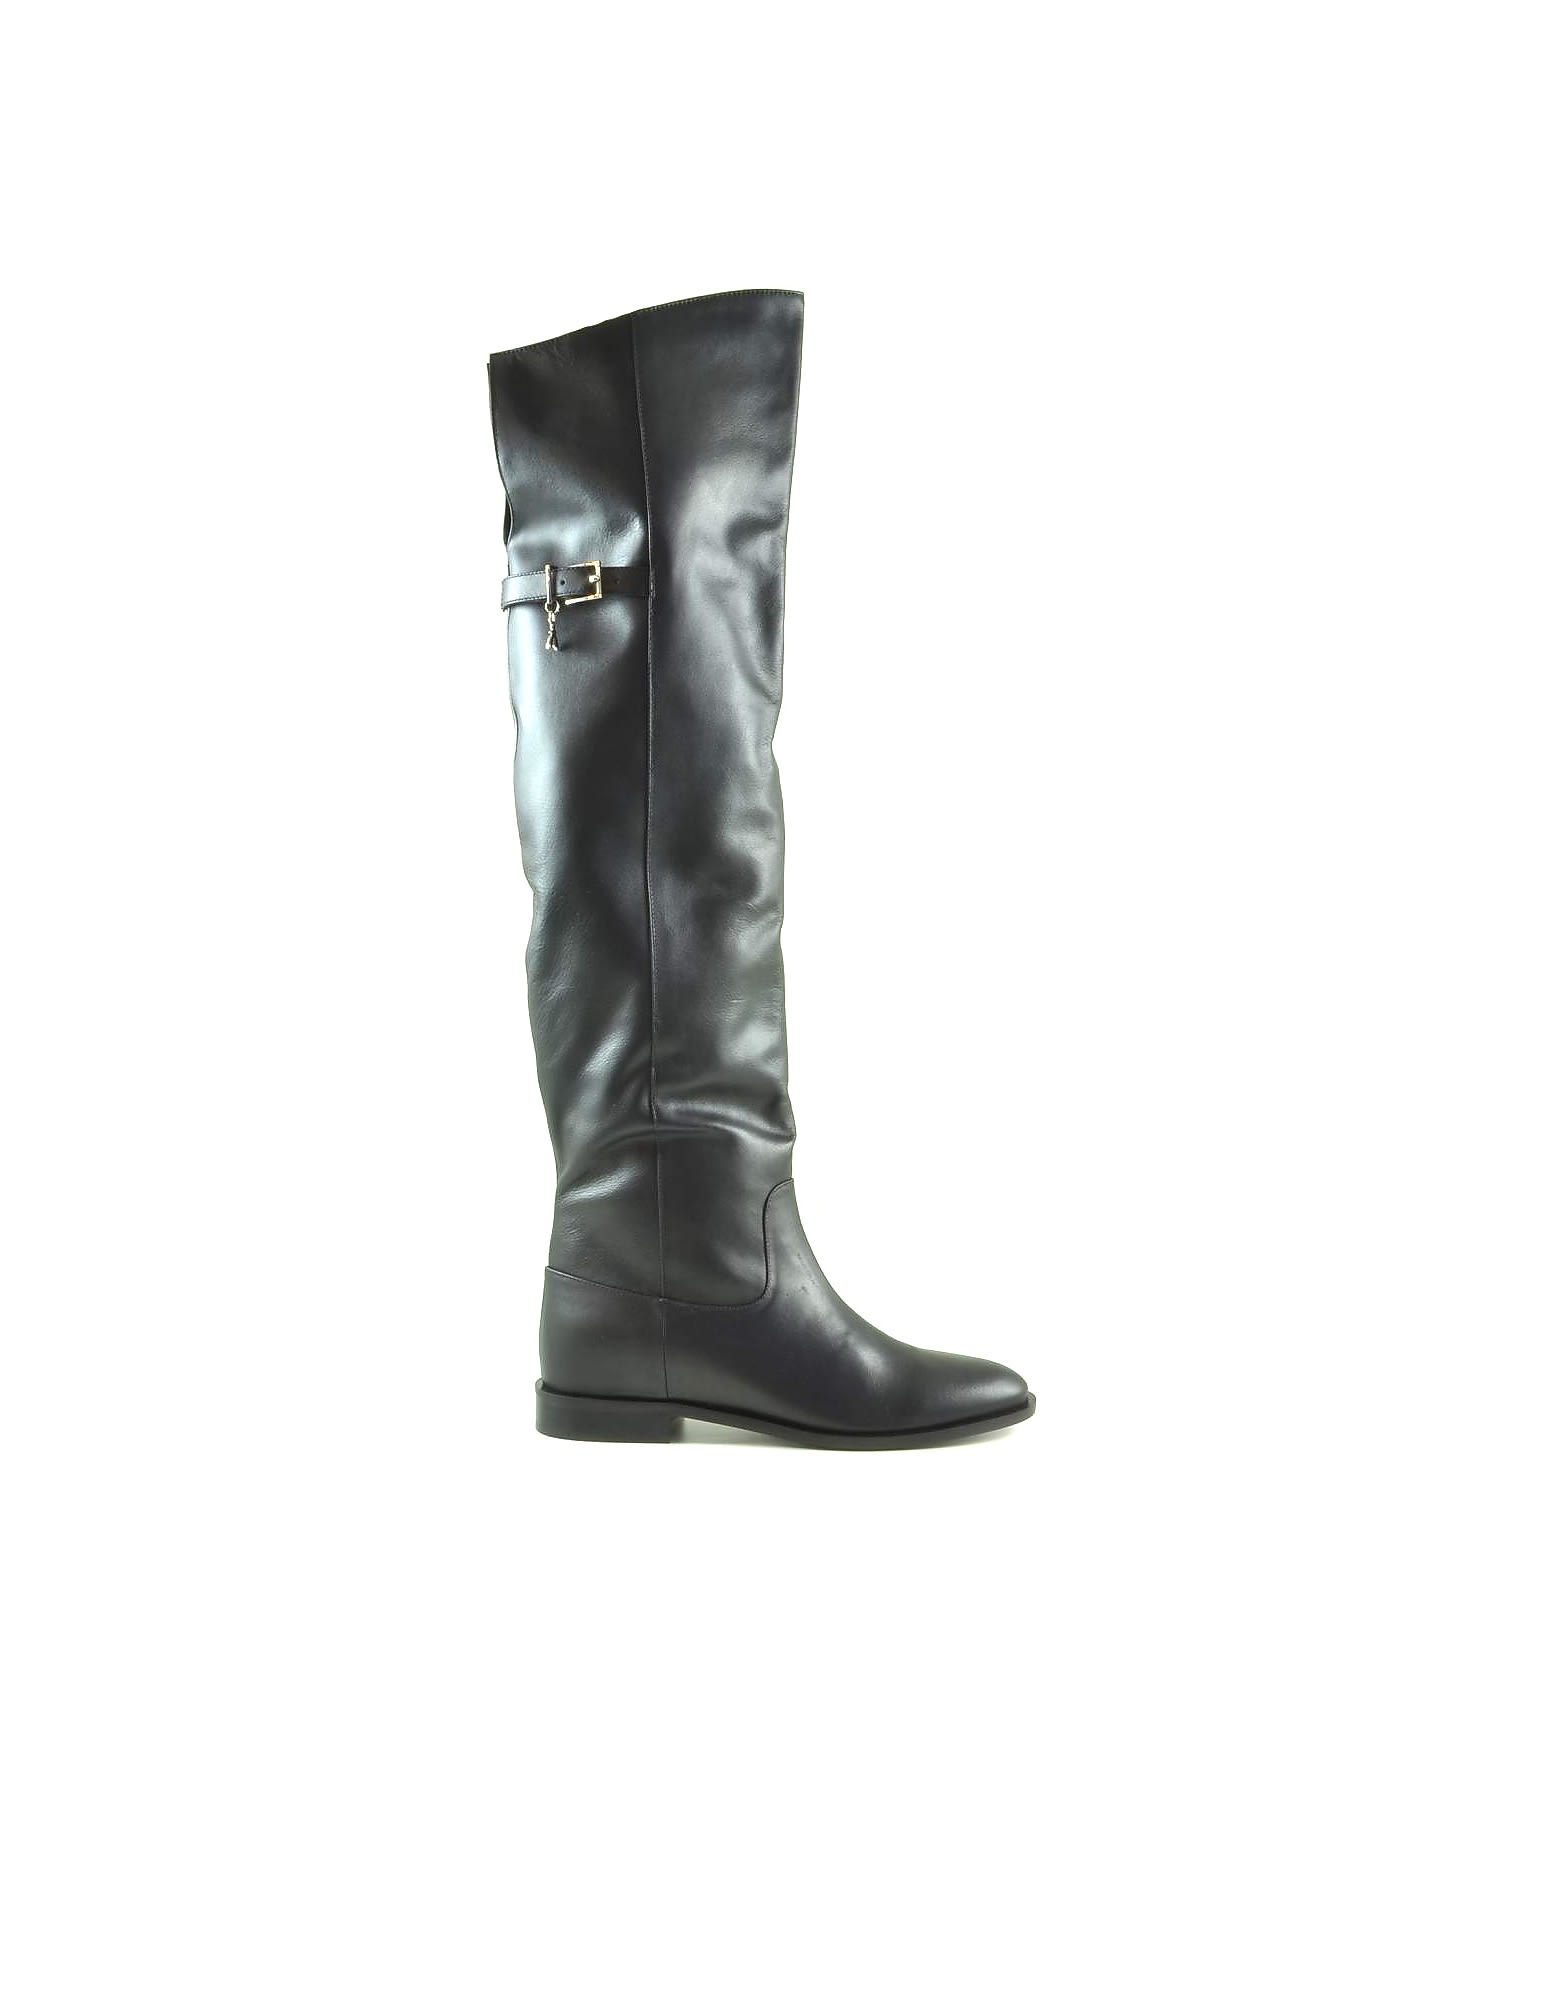 Patrizia Pepe Black Leather Over-the-knee Cuissardes Boots